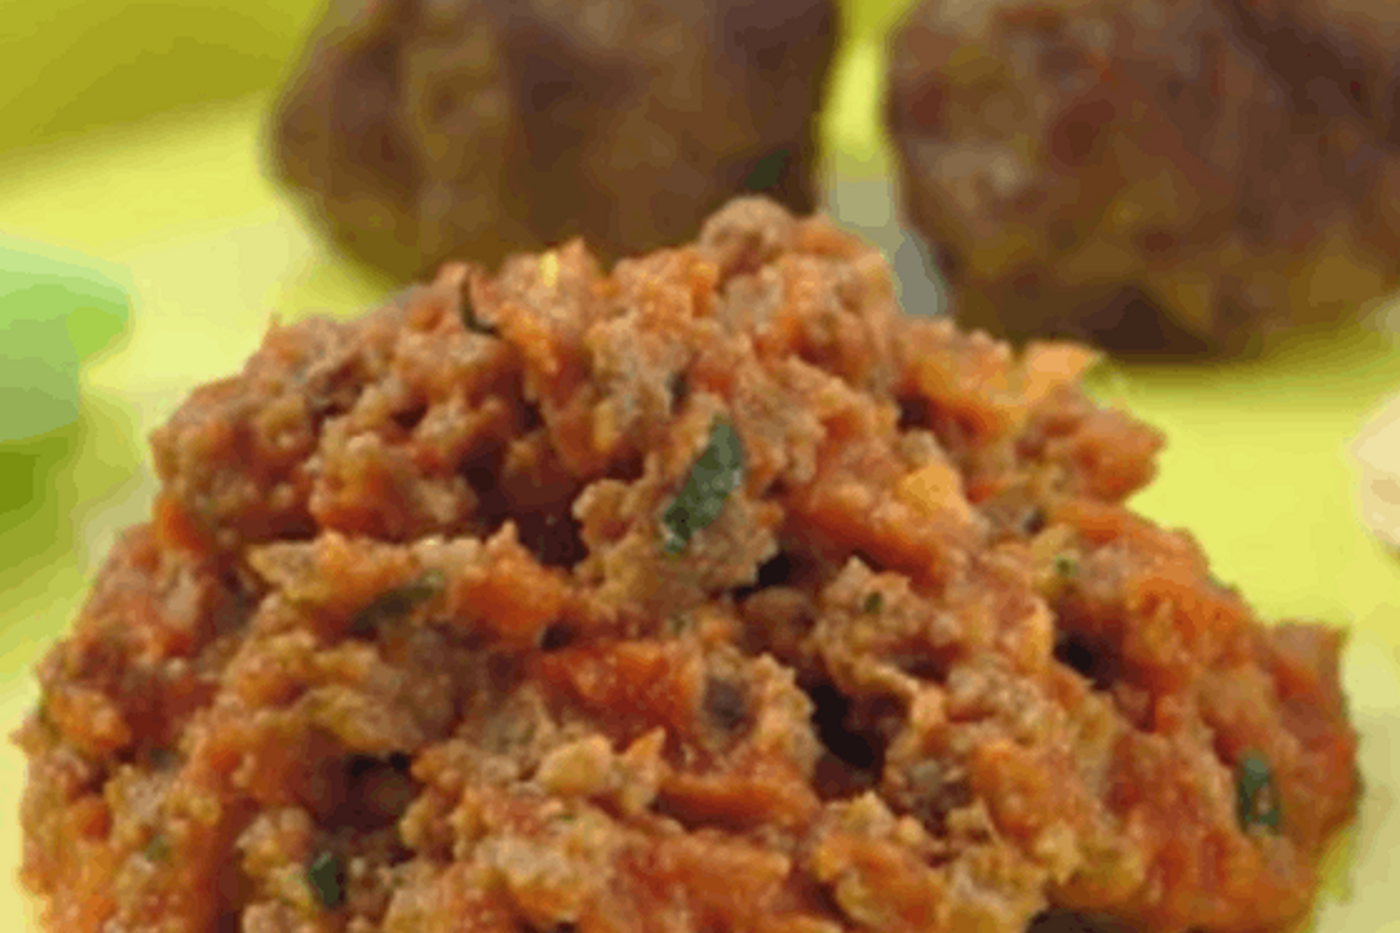 Mango Sauce and Meatball Weaning Recipe